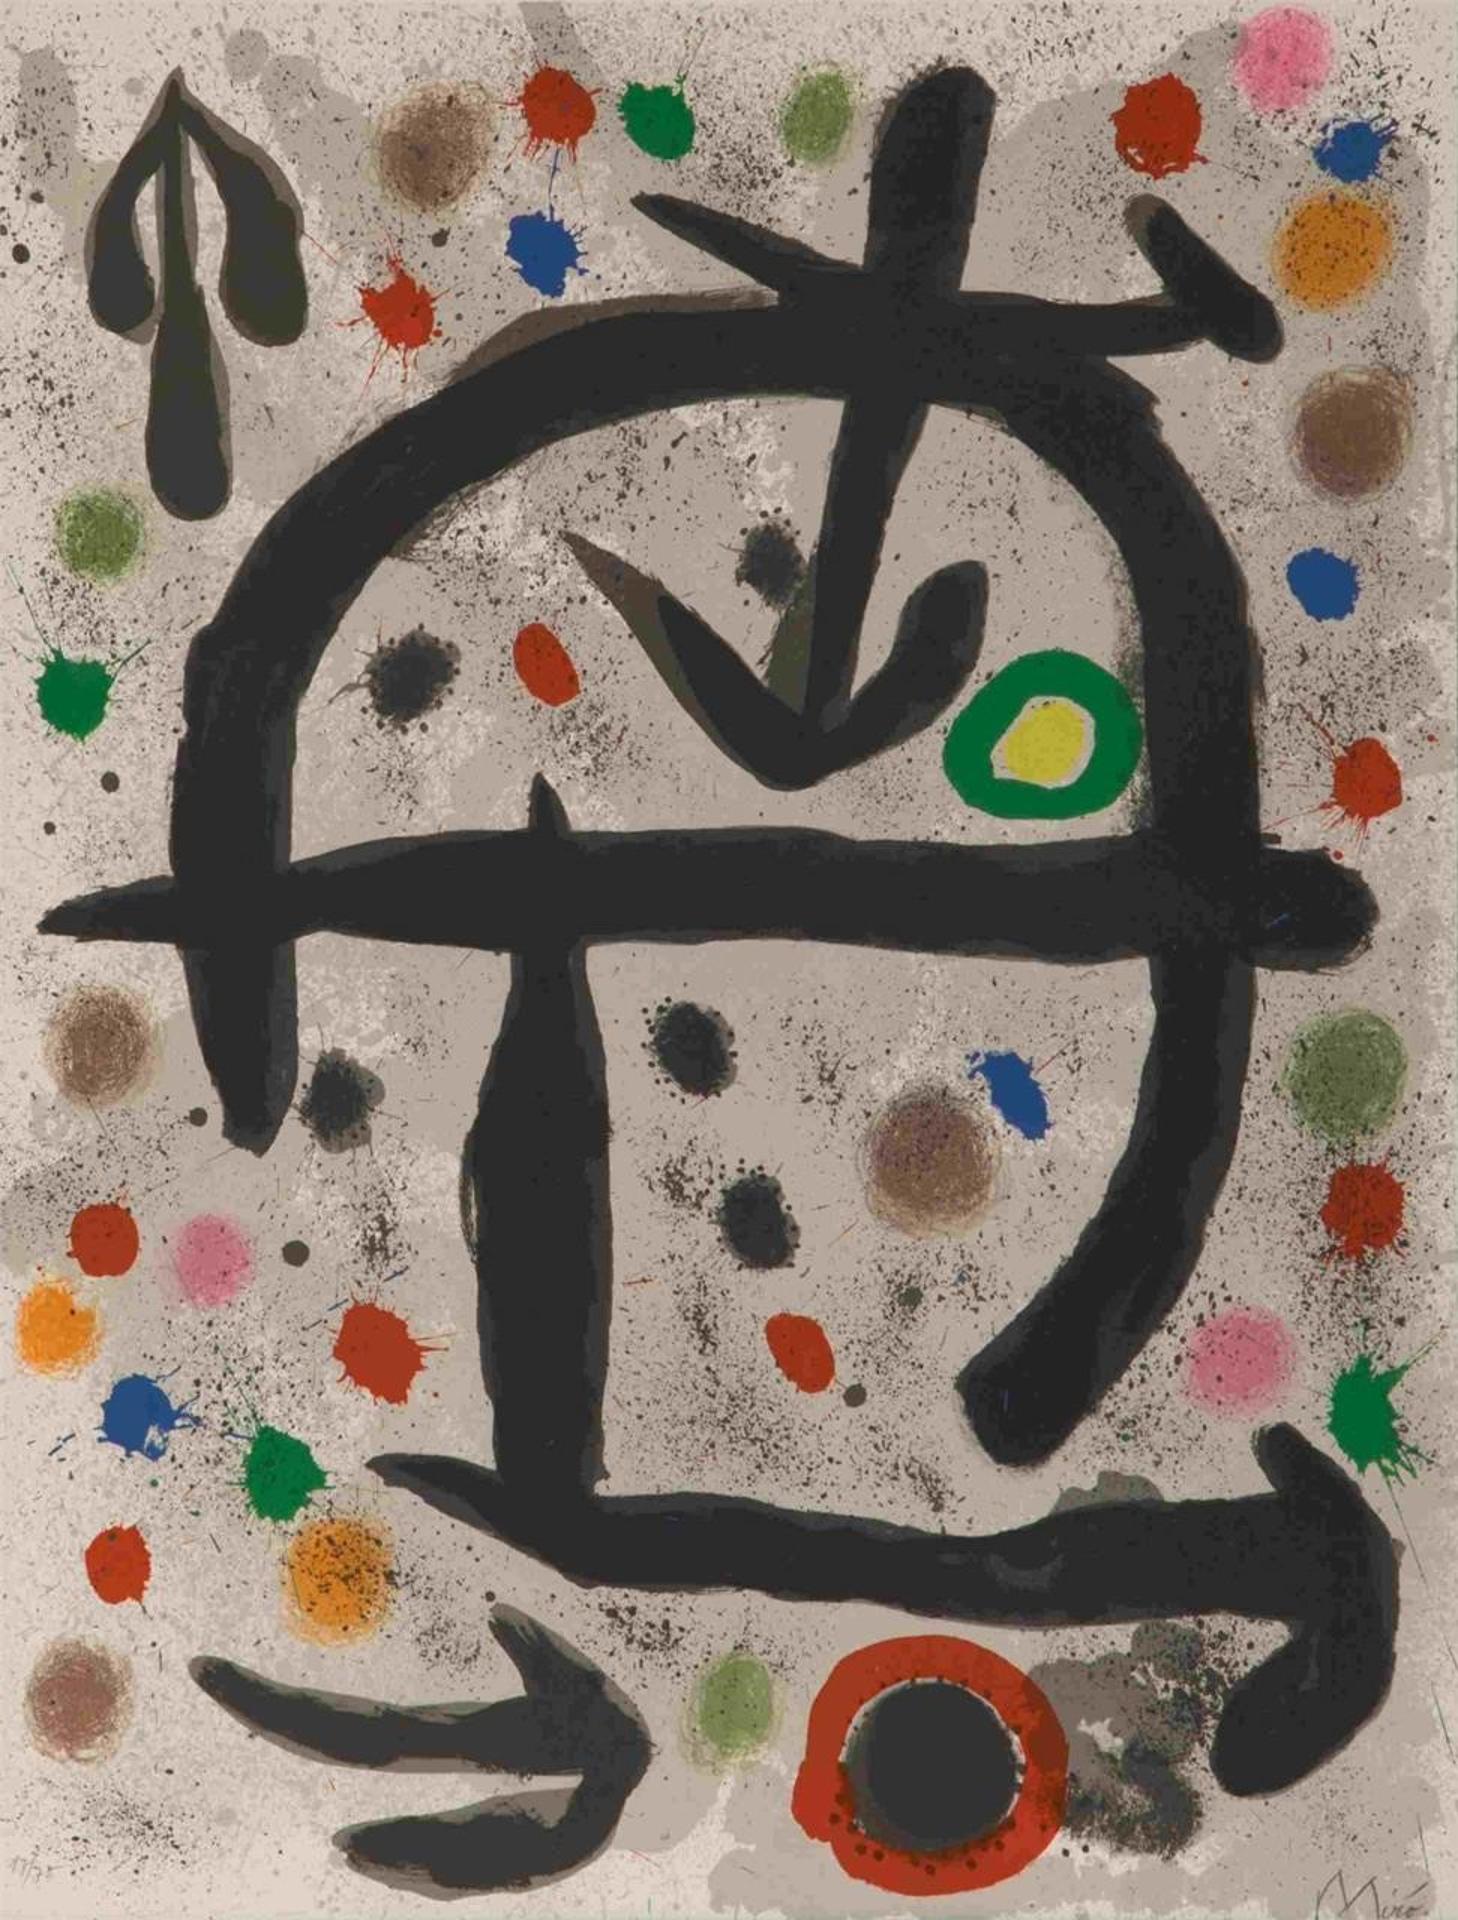 Joan Miró (1893-1983) - Plate 1 from Les Perseides